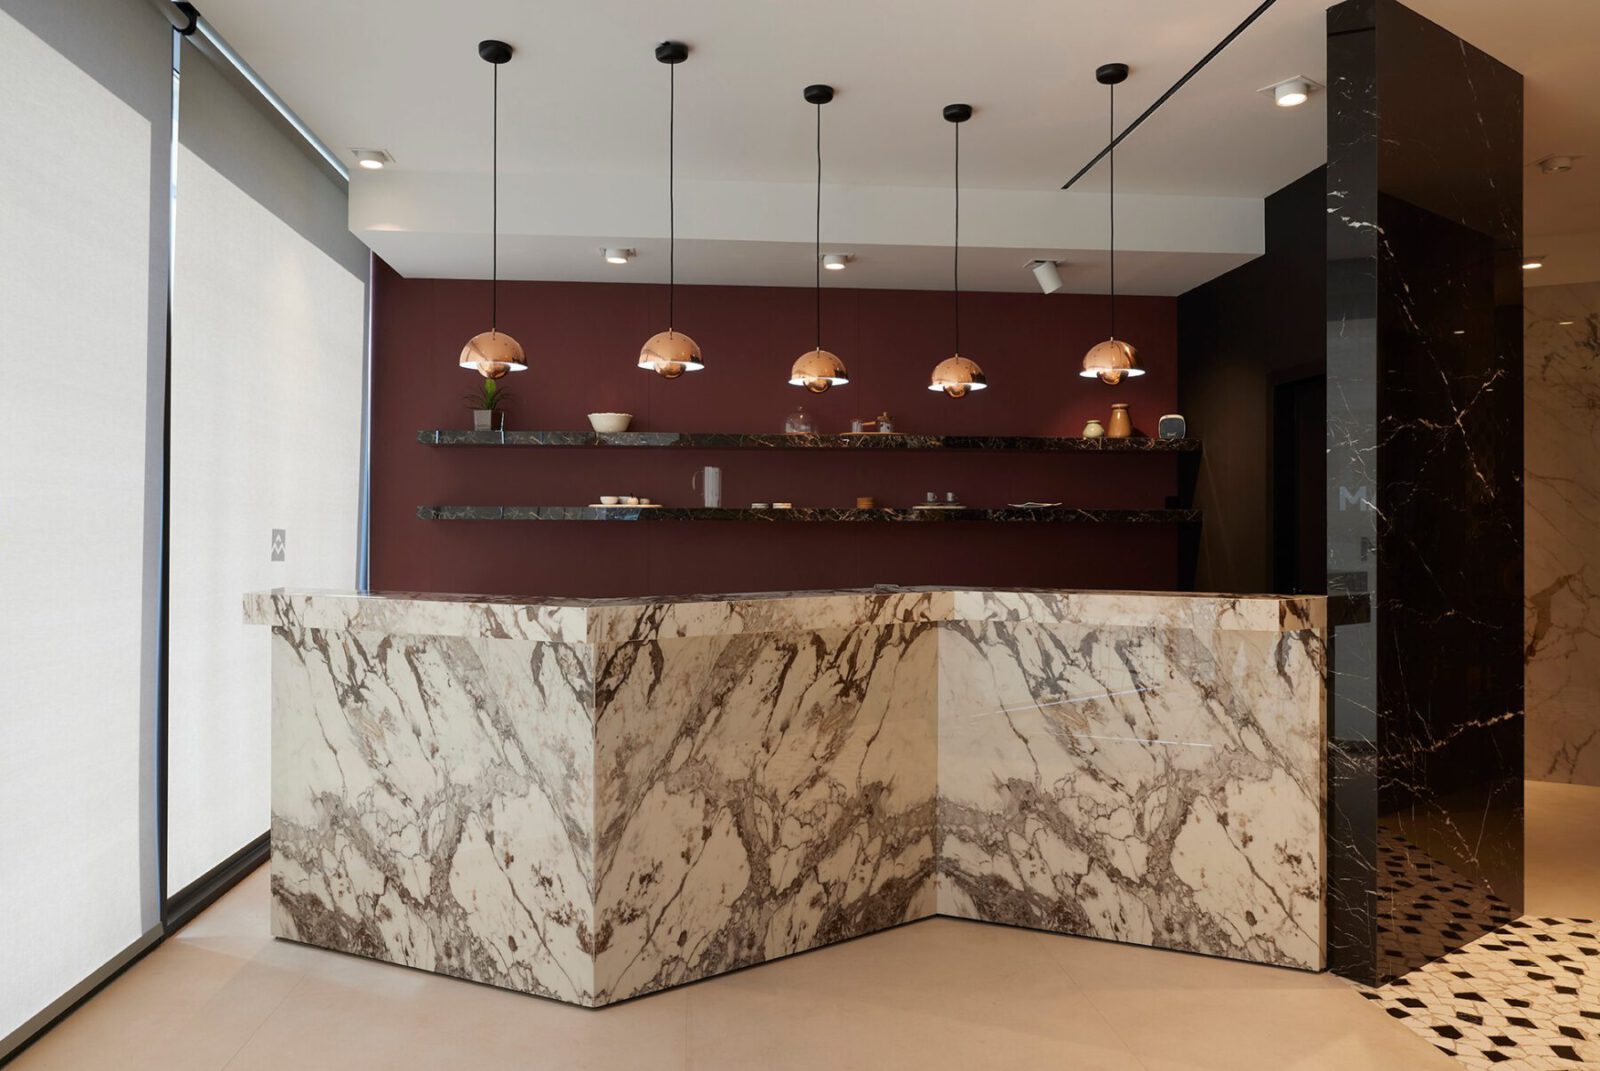 Archisearch Marazzi Athens Flagship Showroom | The Orbit, Athens